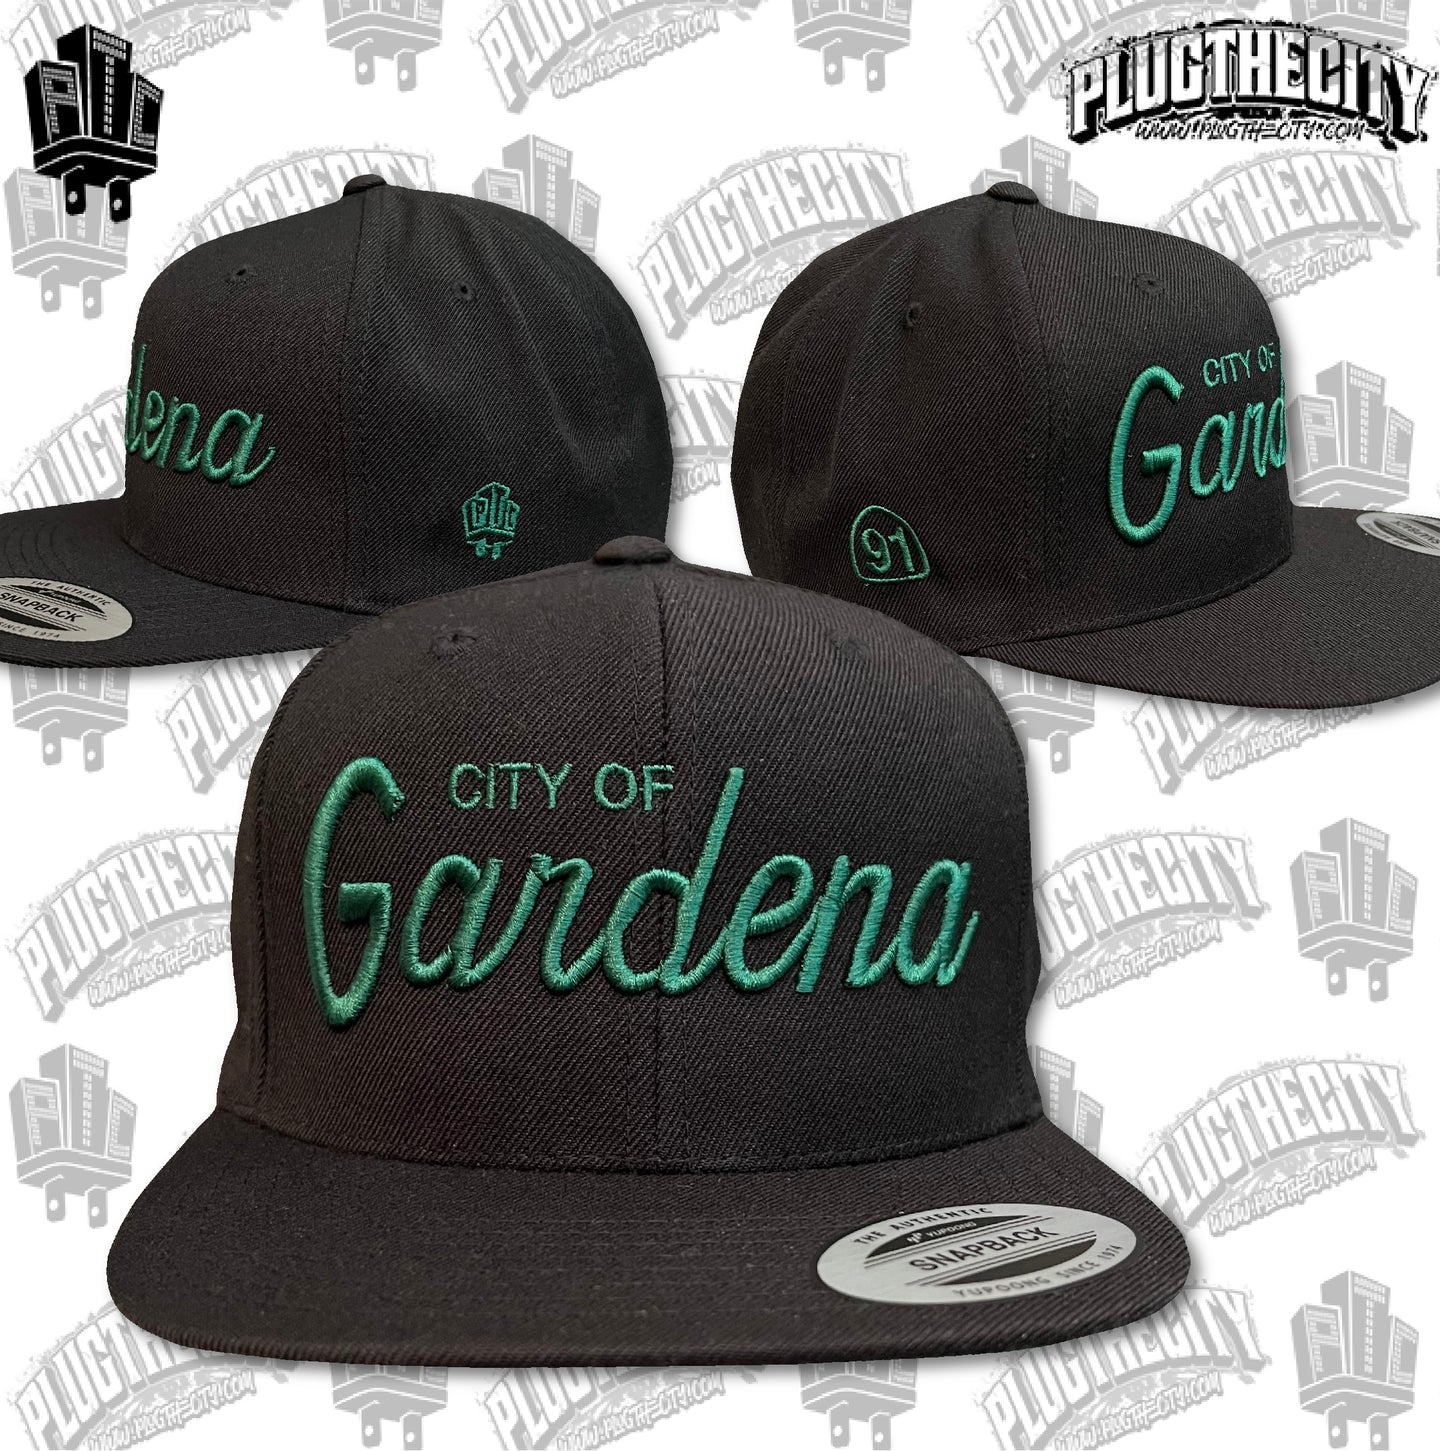 City of Gardena-91West & PTC logos on the side of snapback baseball hat-Color:BLK, Thread GRN